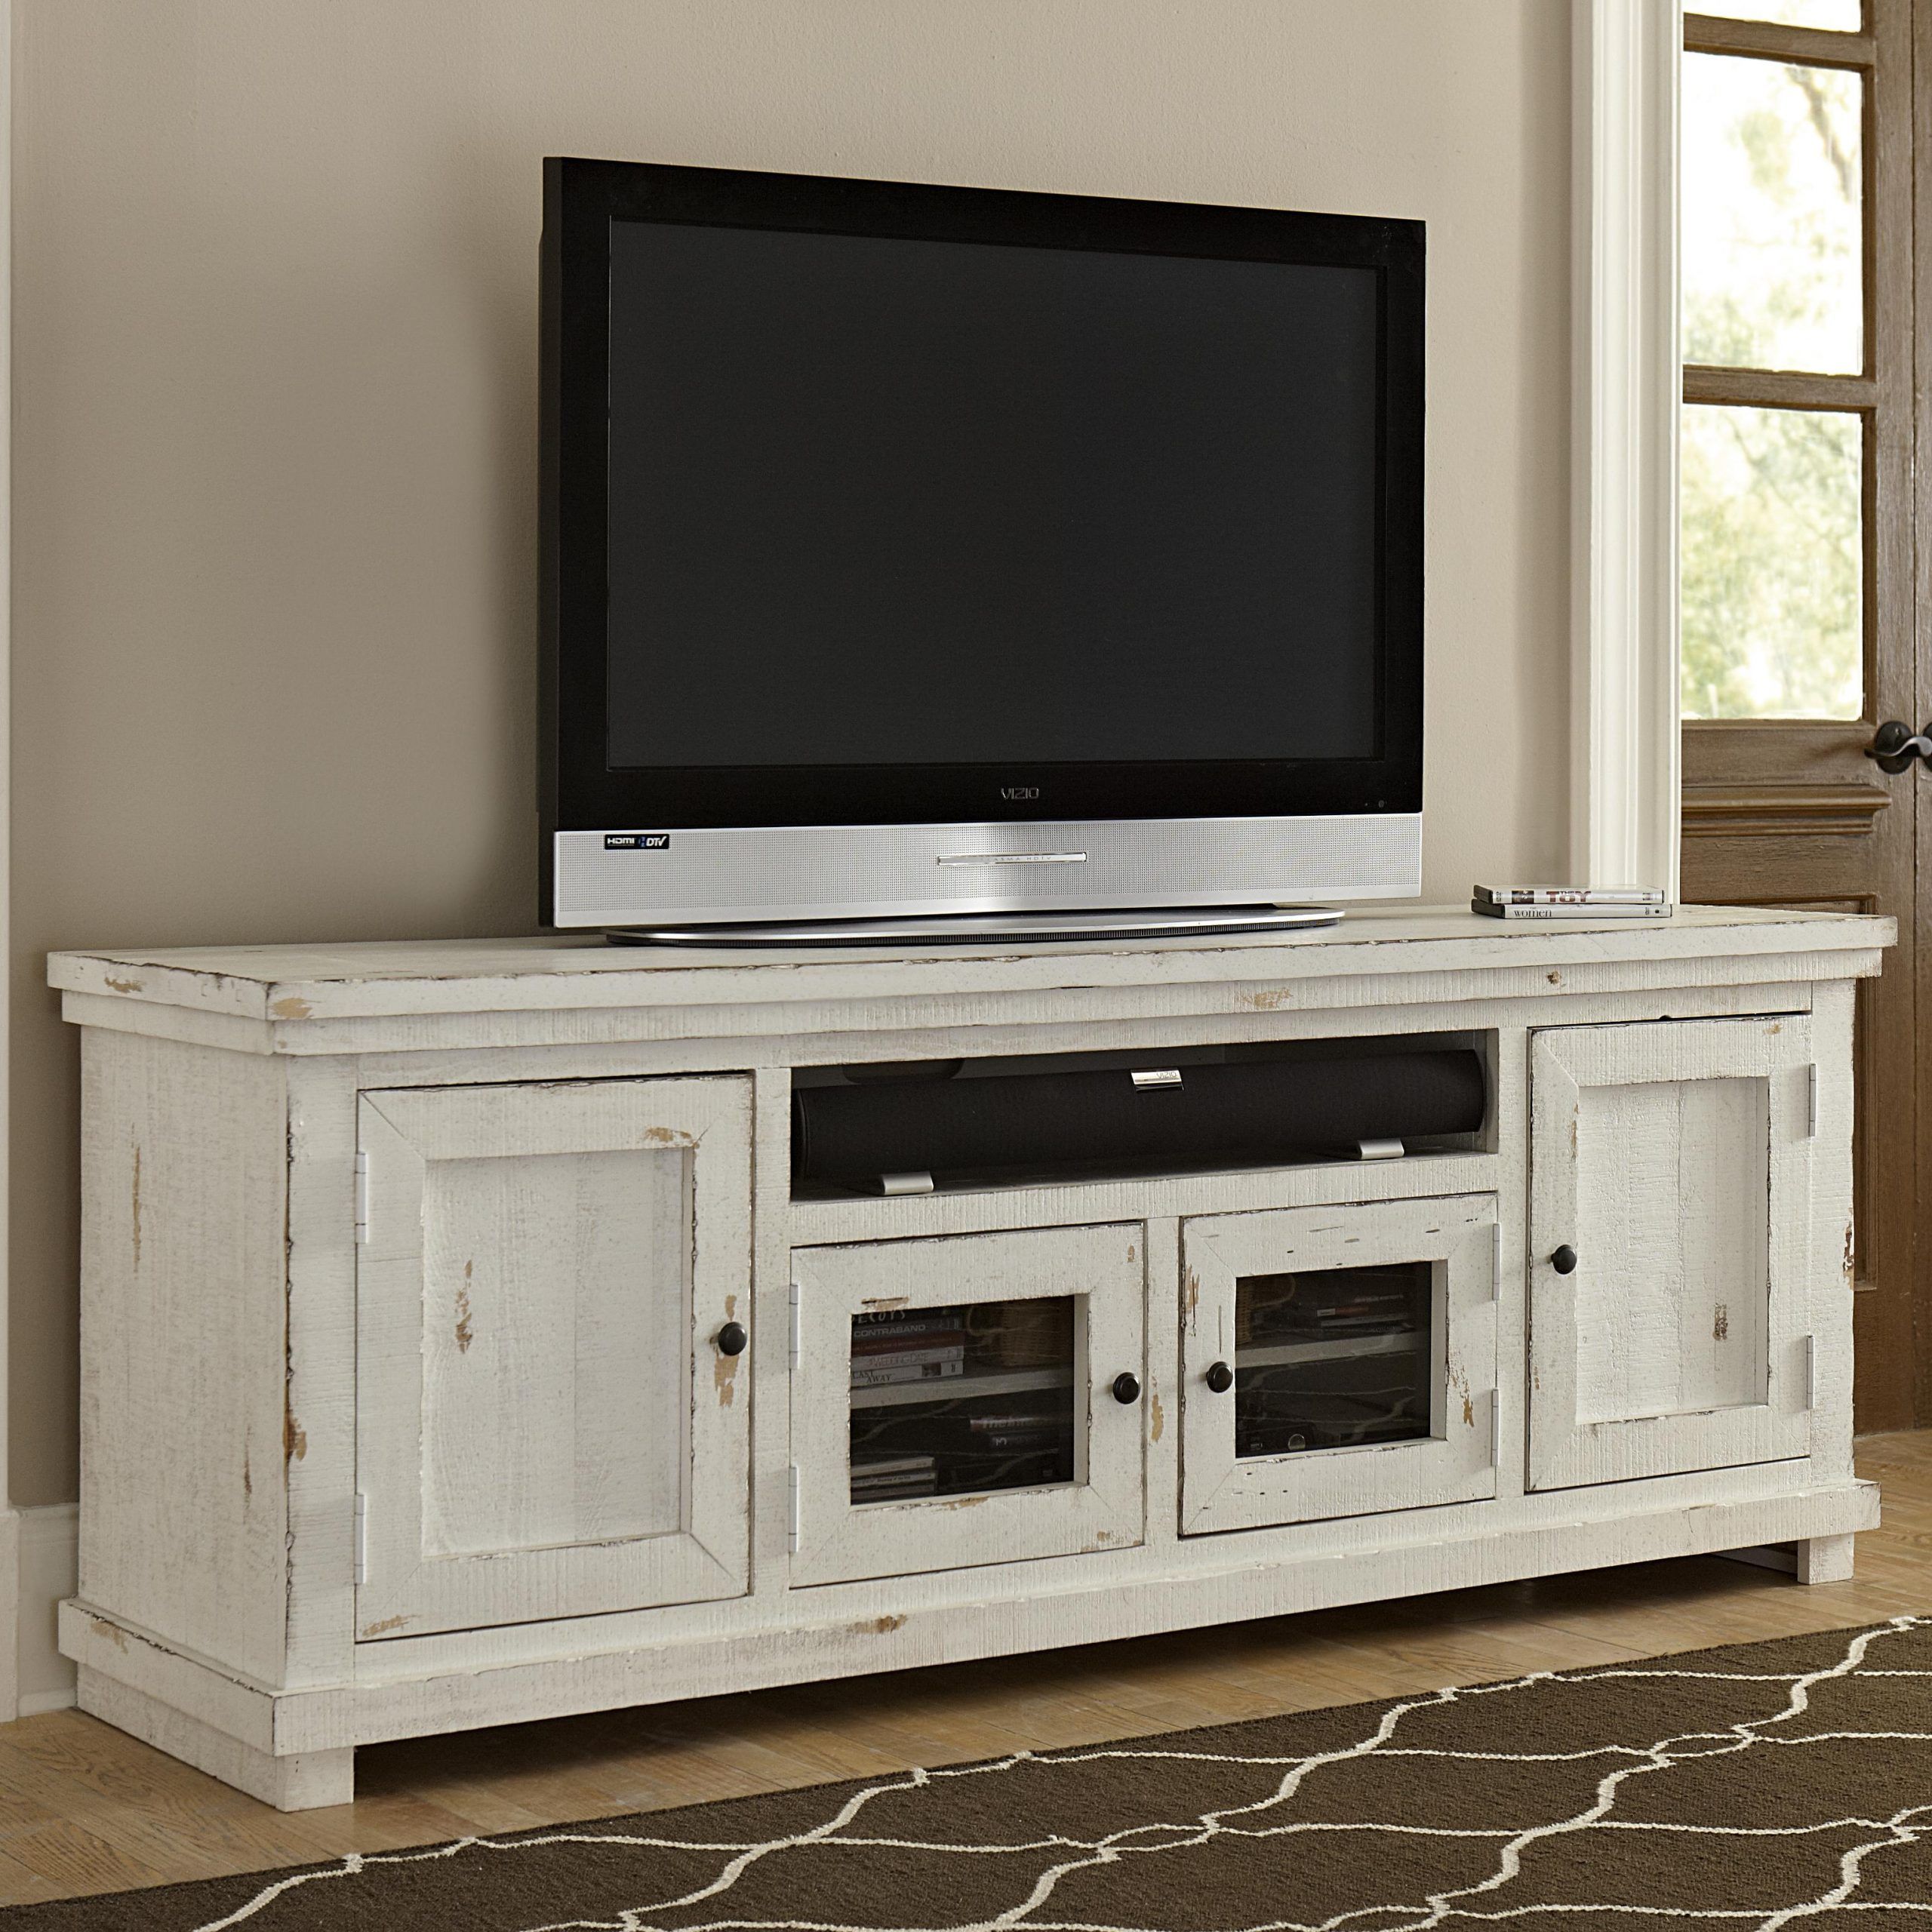 Progressive Furniture Willow Large 74" Distressed Pine Pertaining To White Tall Tv Stands (View 4 of 15)